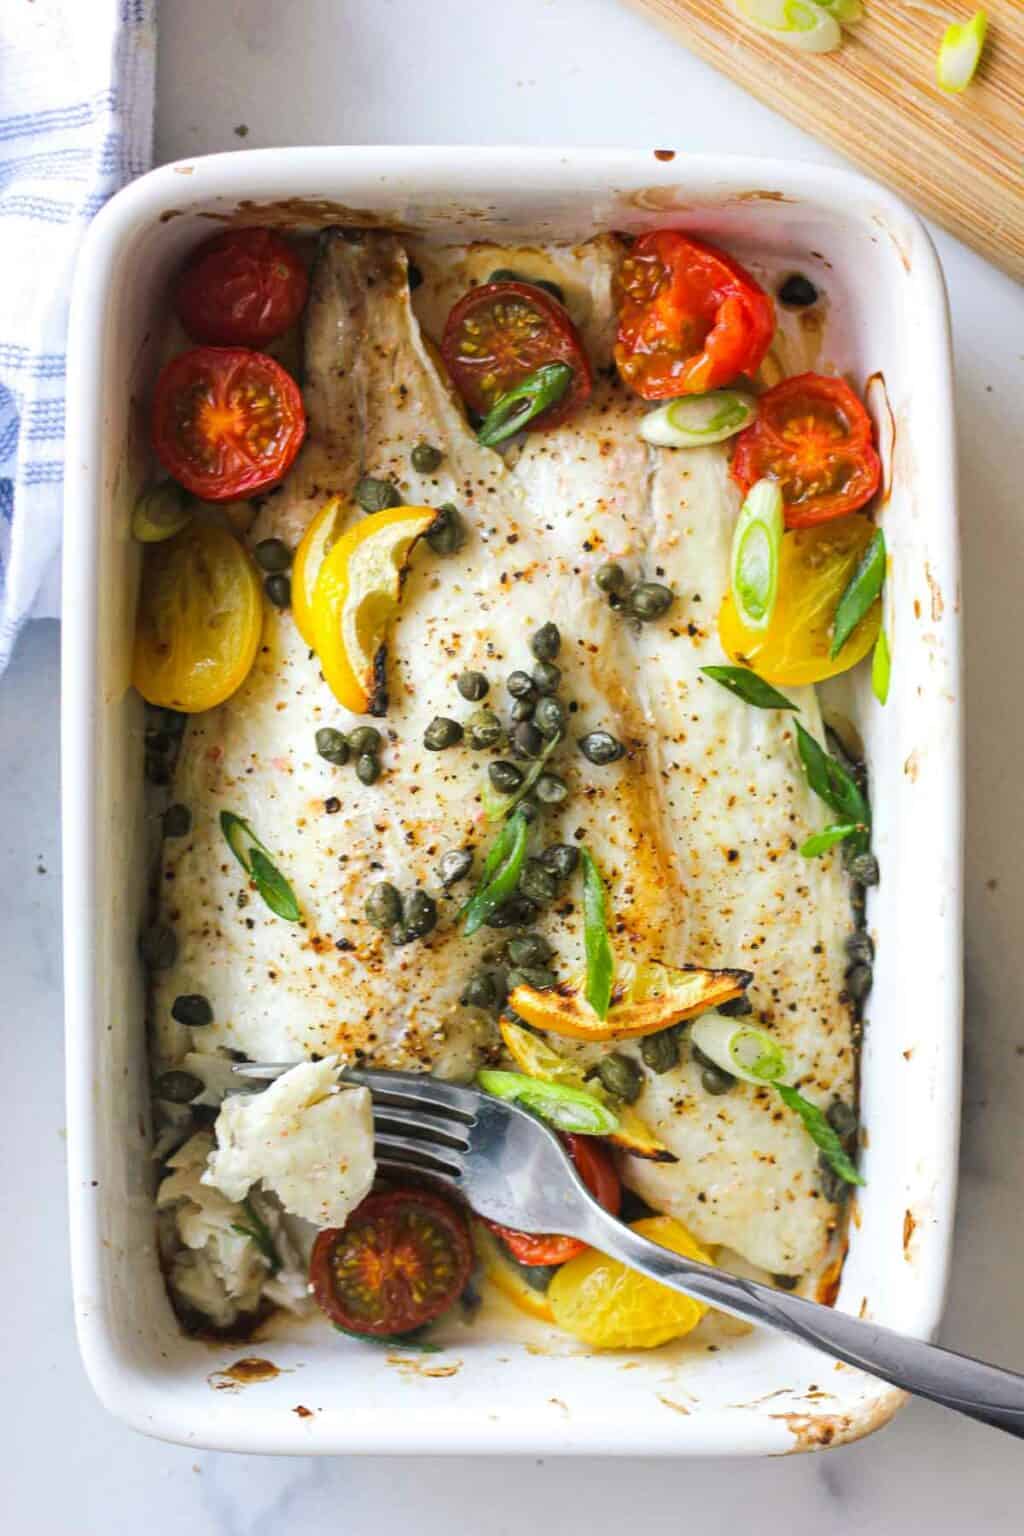 Healthy oven baked sea bream fillet - The Top Meal